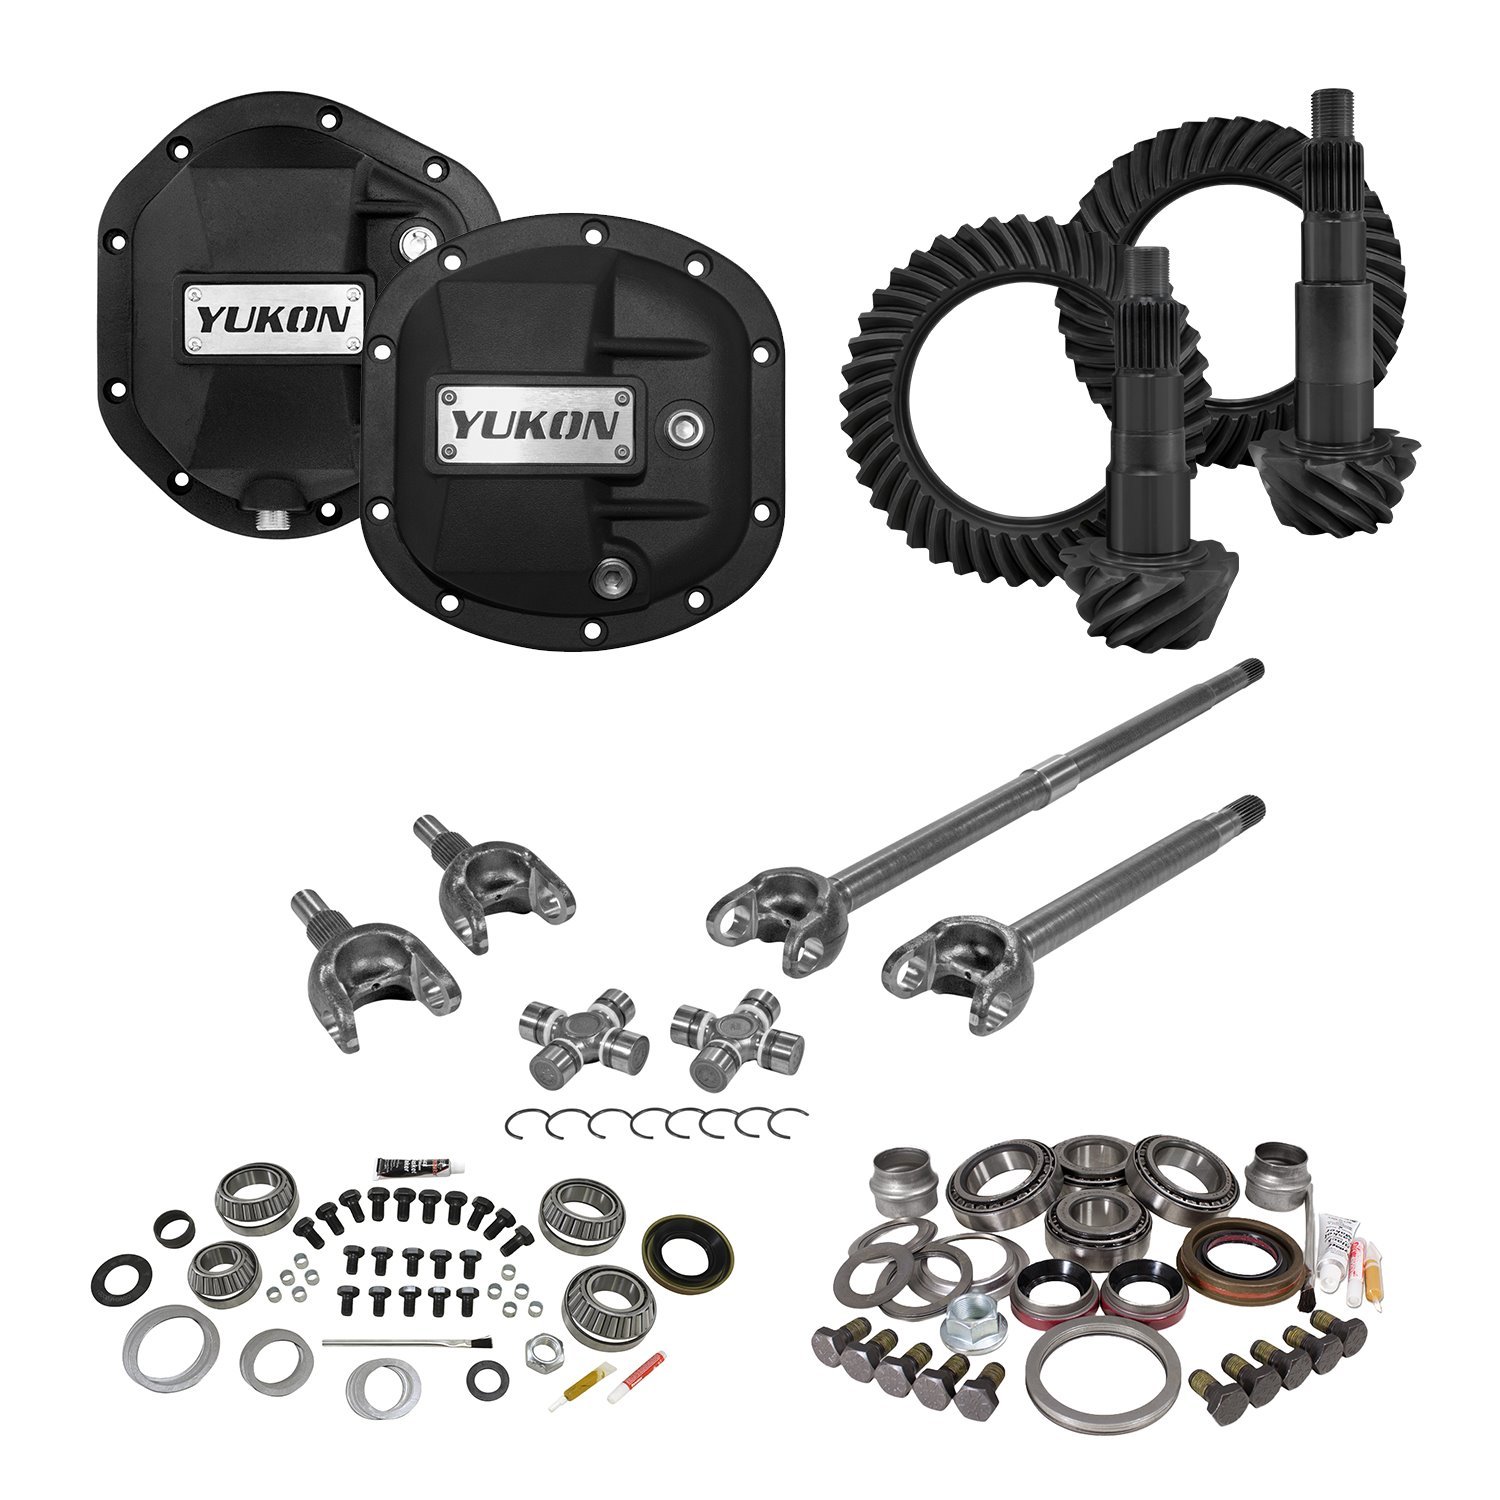 Stage 3 Jeep Jk Re-Gear Kit W/Covers, Front Axles, Dana 30/44, 4.11 Ratio